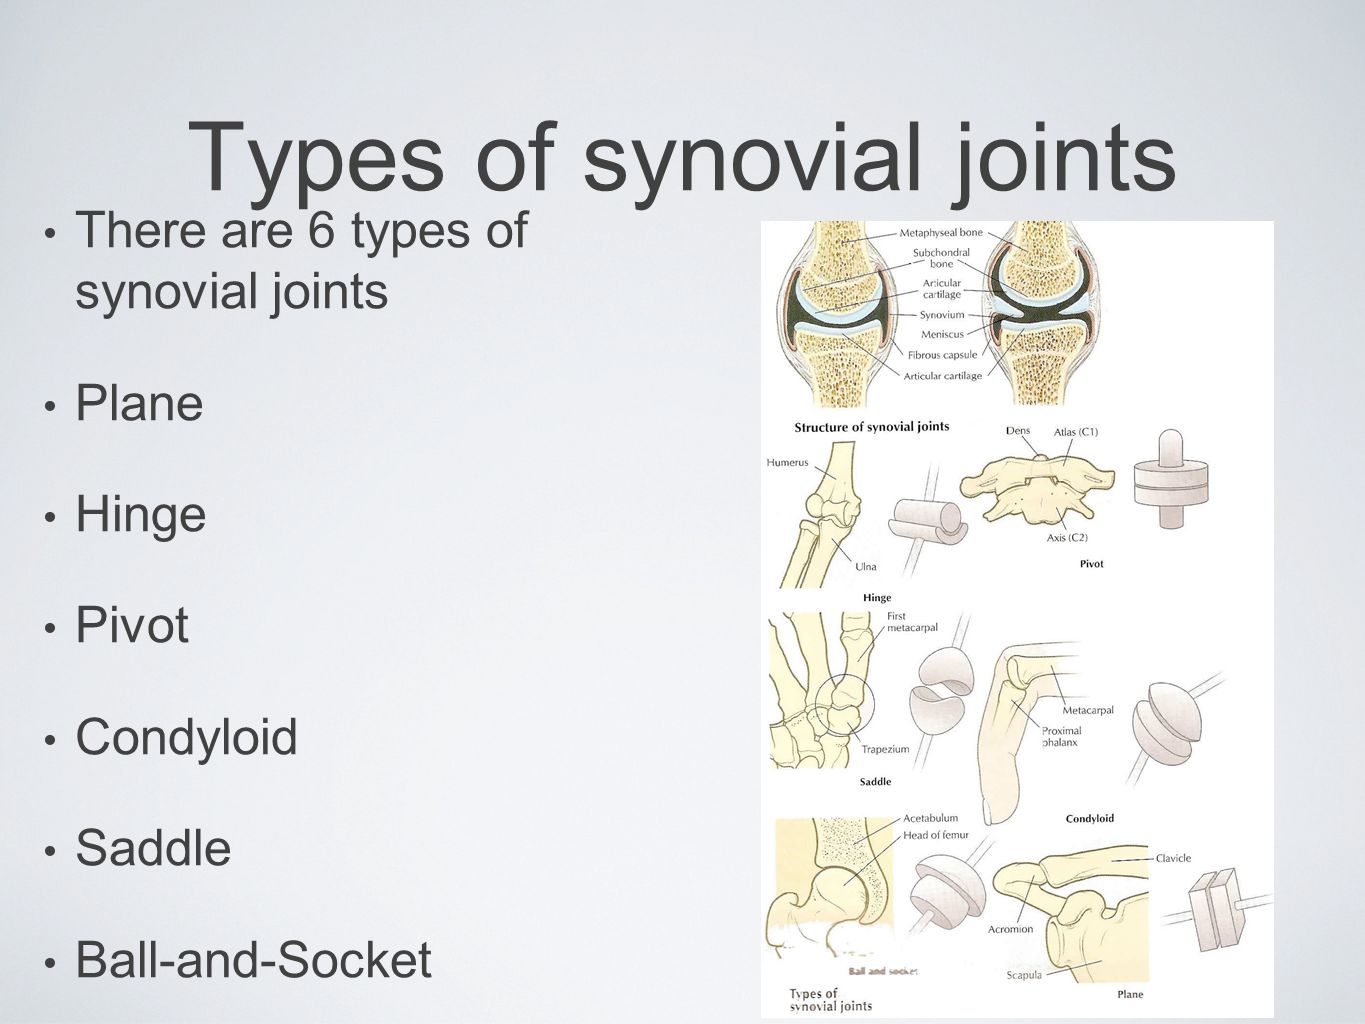 Types of synovial joints